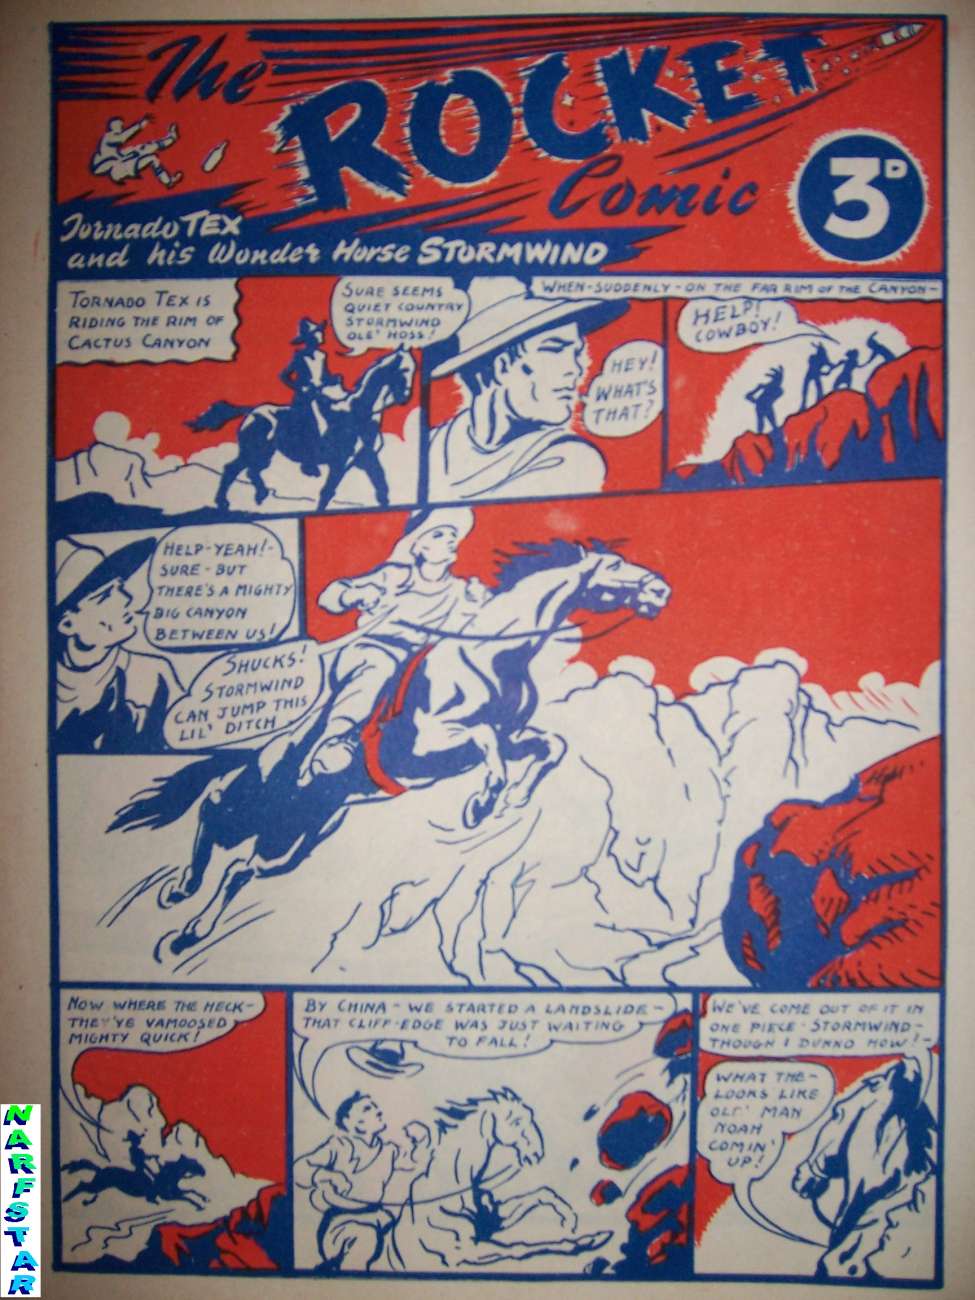 Comic Book Cover For Rocket, The (digital camera)